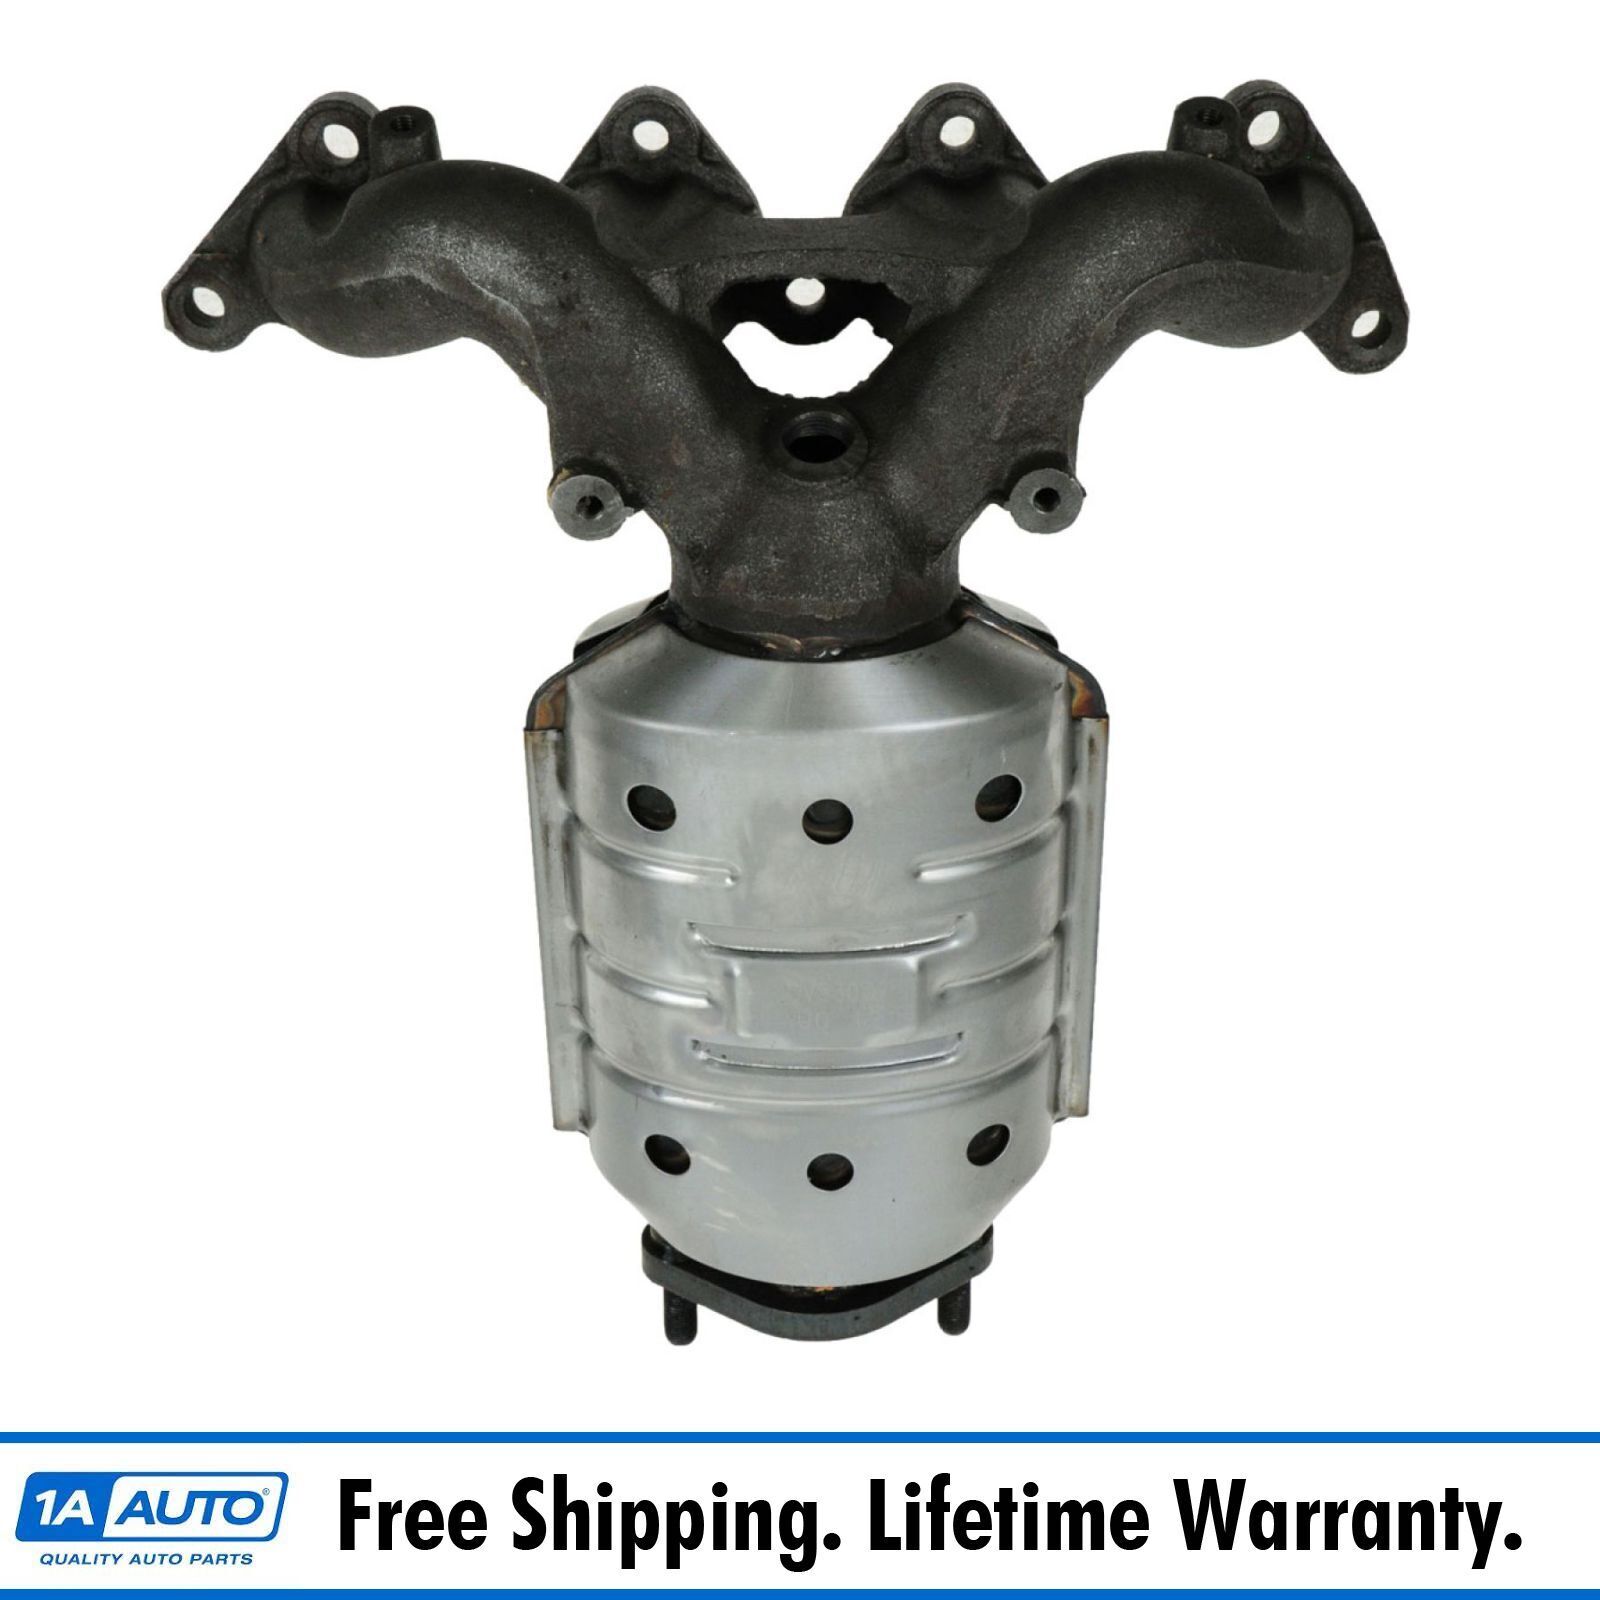 Direct Fit Exhaust Manifold & Catalytic Converter Assembly For Elantra Spectra